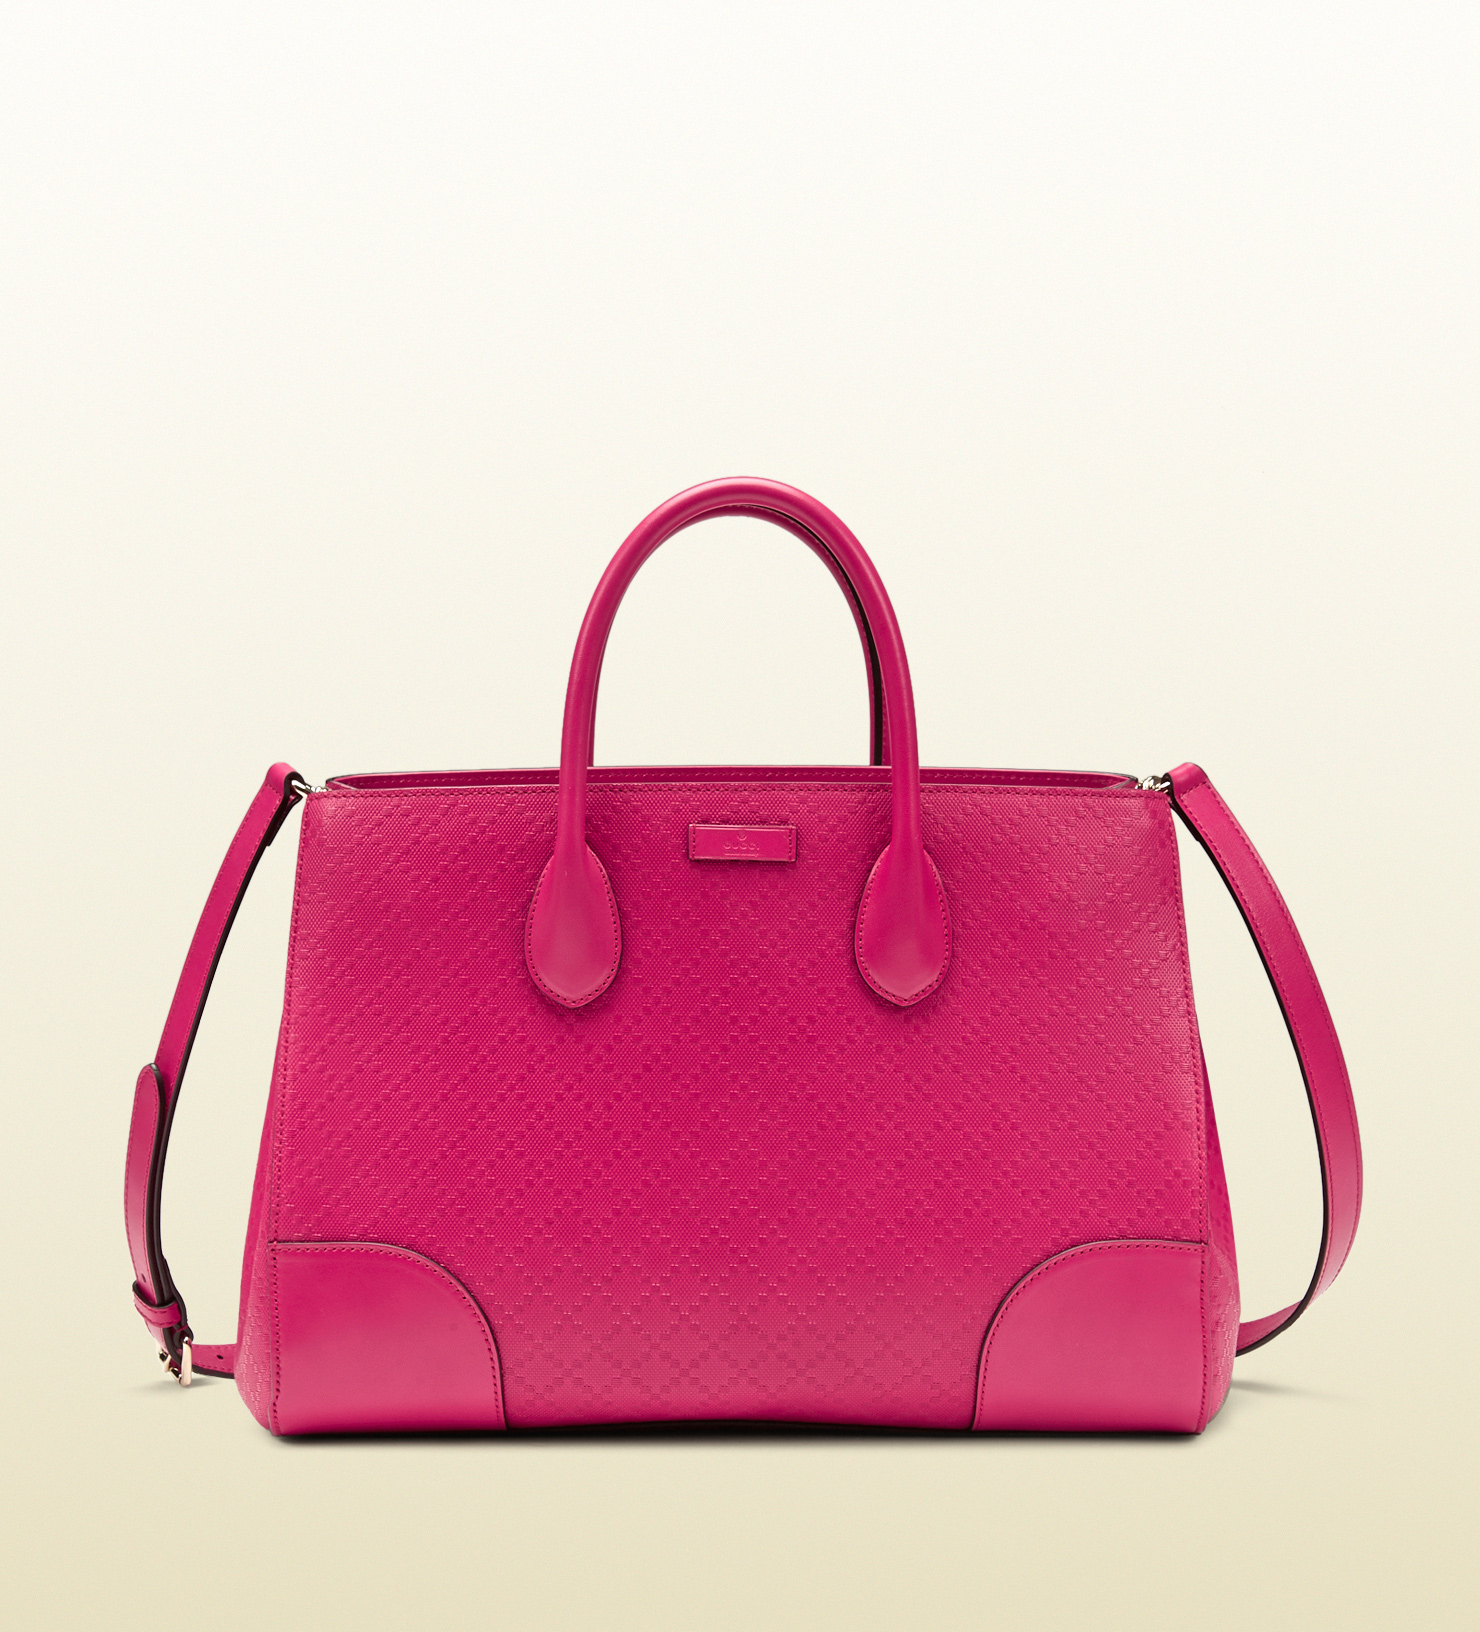 Lyst - Gucci Bright Diamante Leather Top Handle Bag in Pink